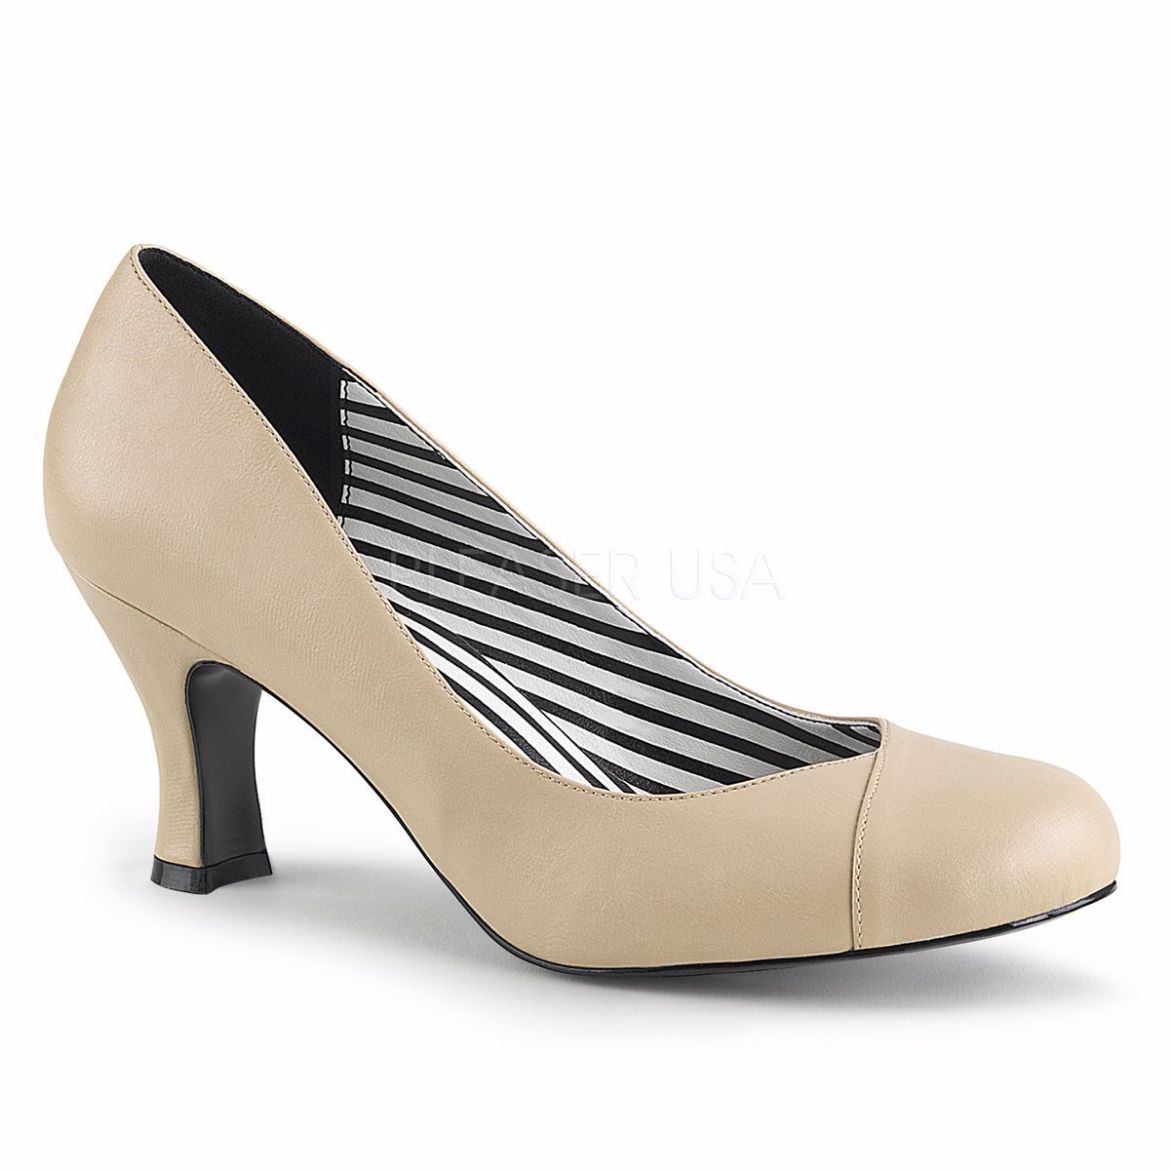 Product image of Pleaser Pink Label Jenna-01 Cream Faux Leather, 3 inch (7.6 cm) Heel Court Pump Shoes